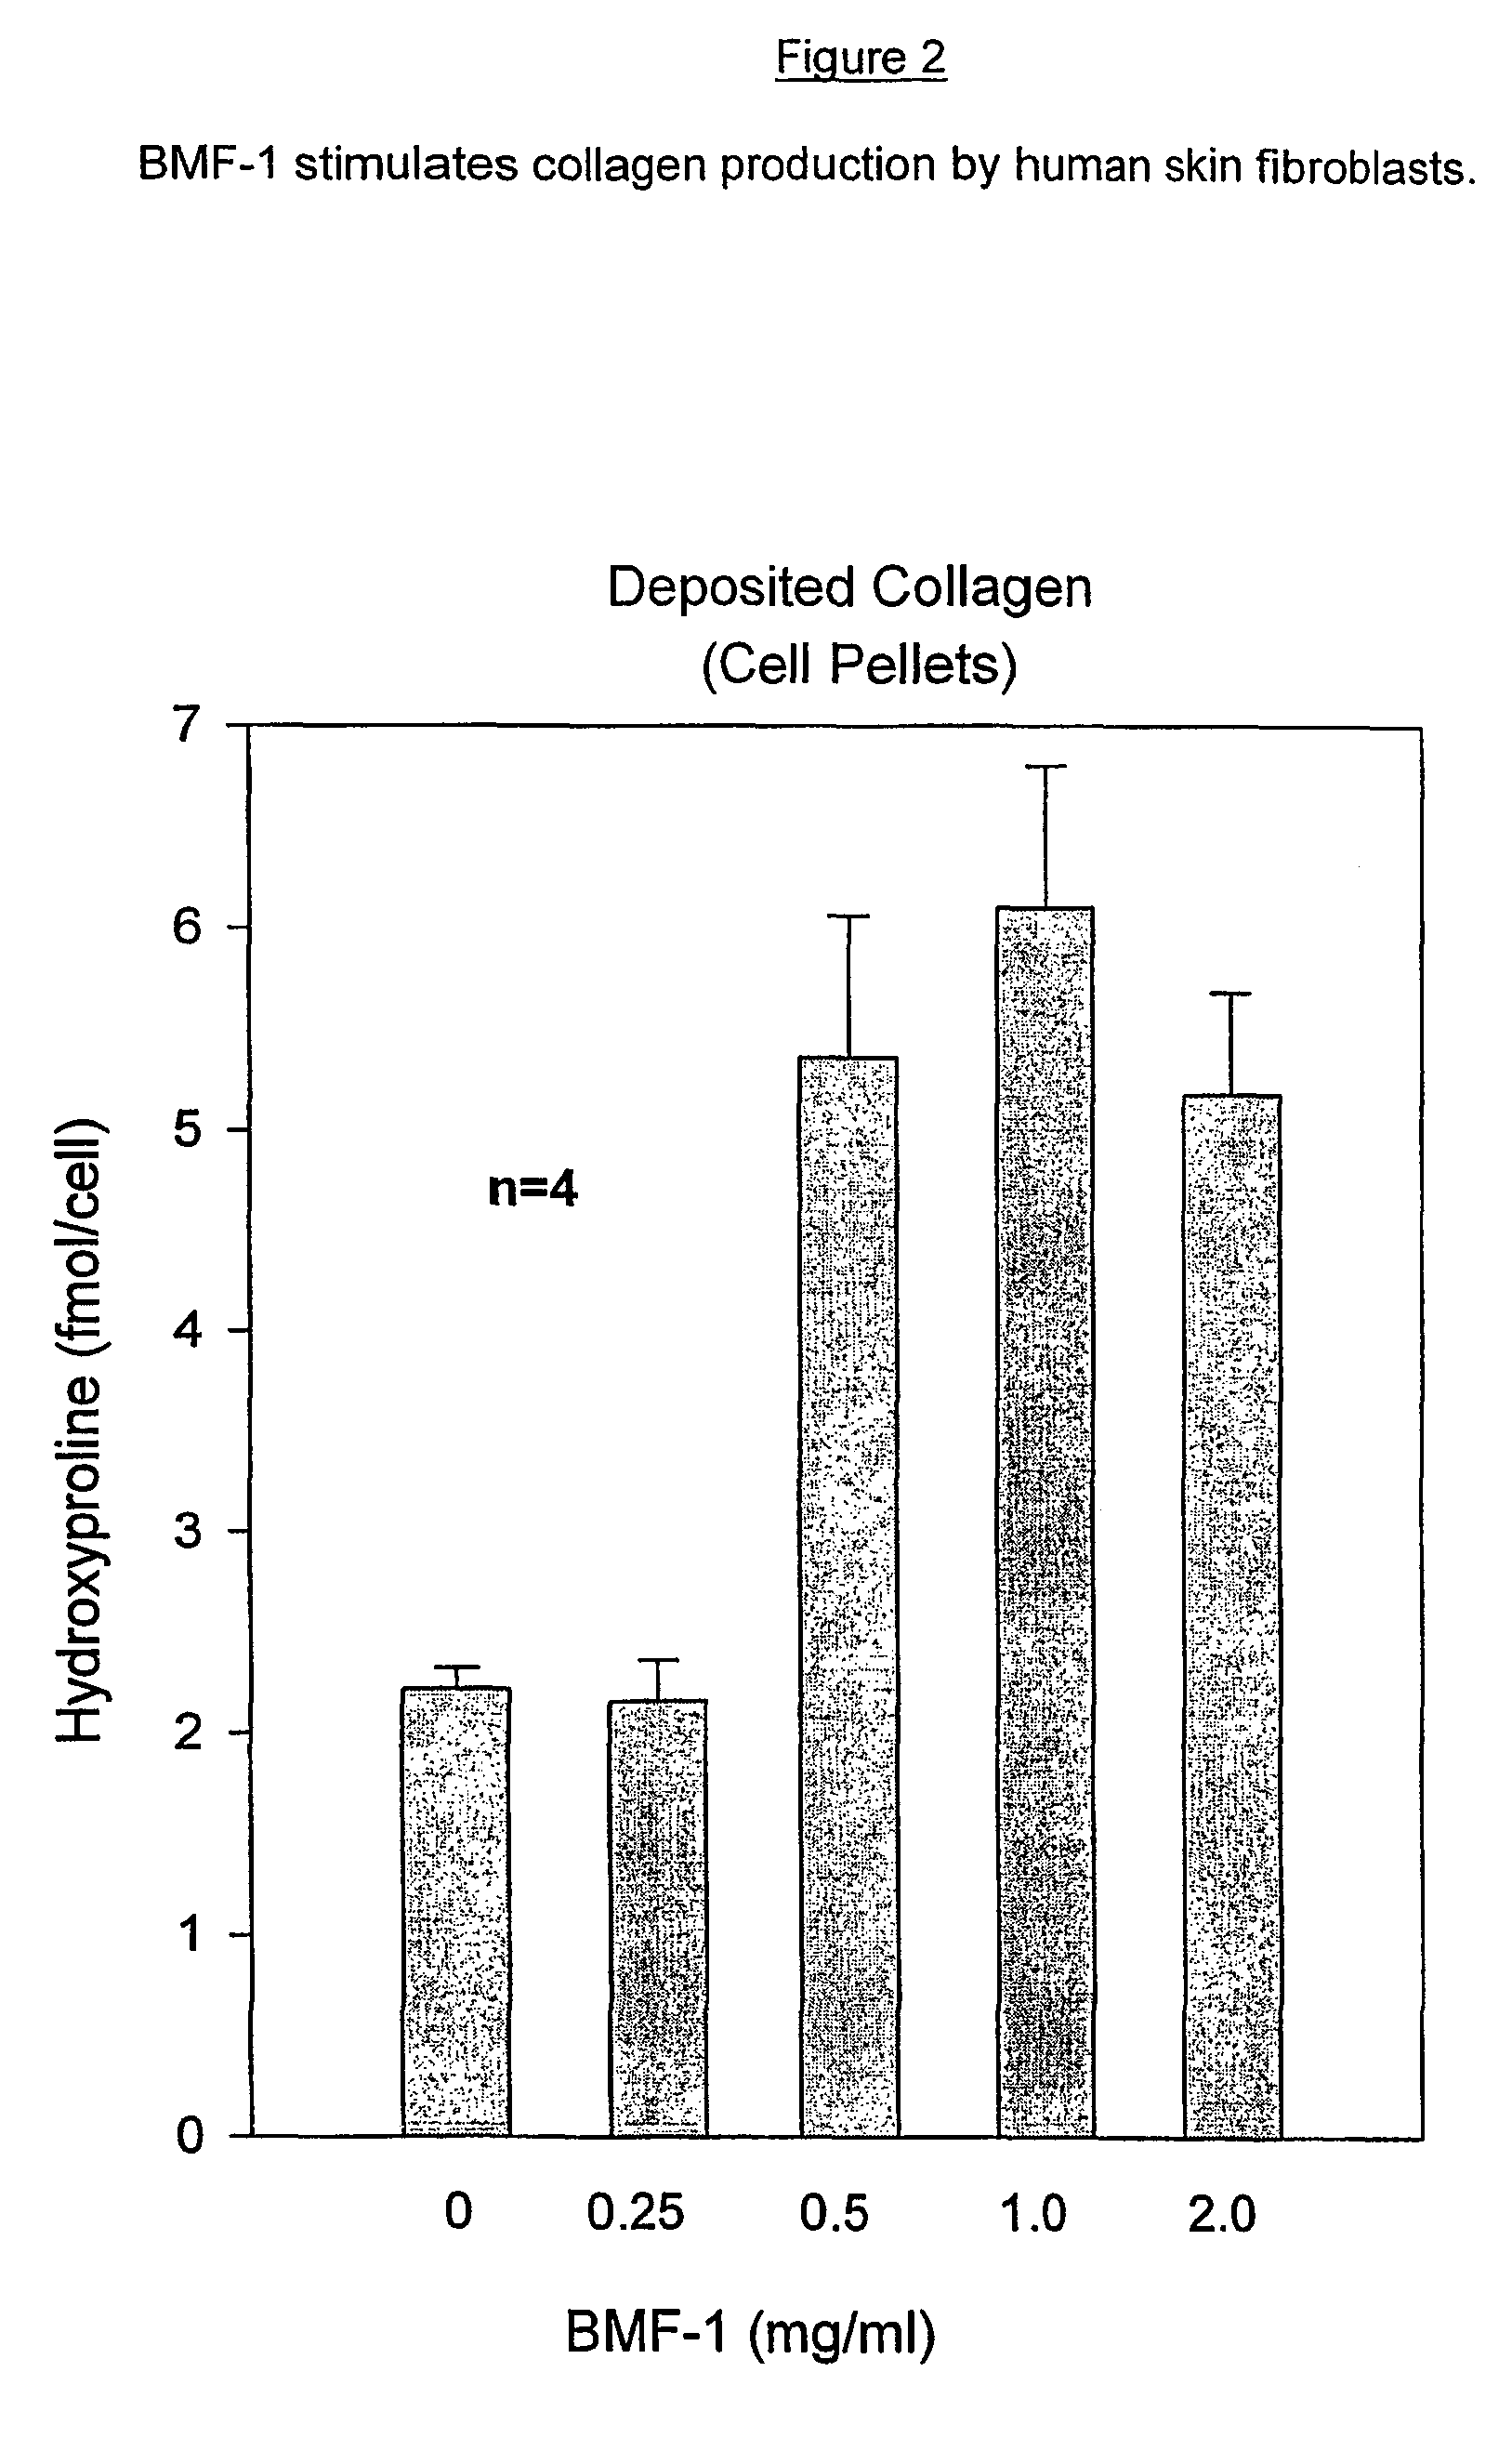 Method for treating damage in intact skin comprising administering a composition comprising basic milk growth factors in amounts higher than those in milk